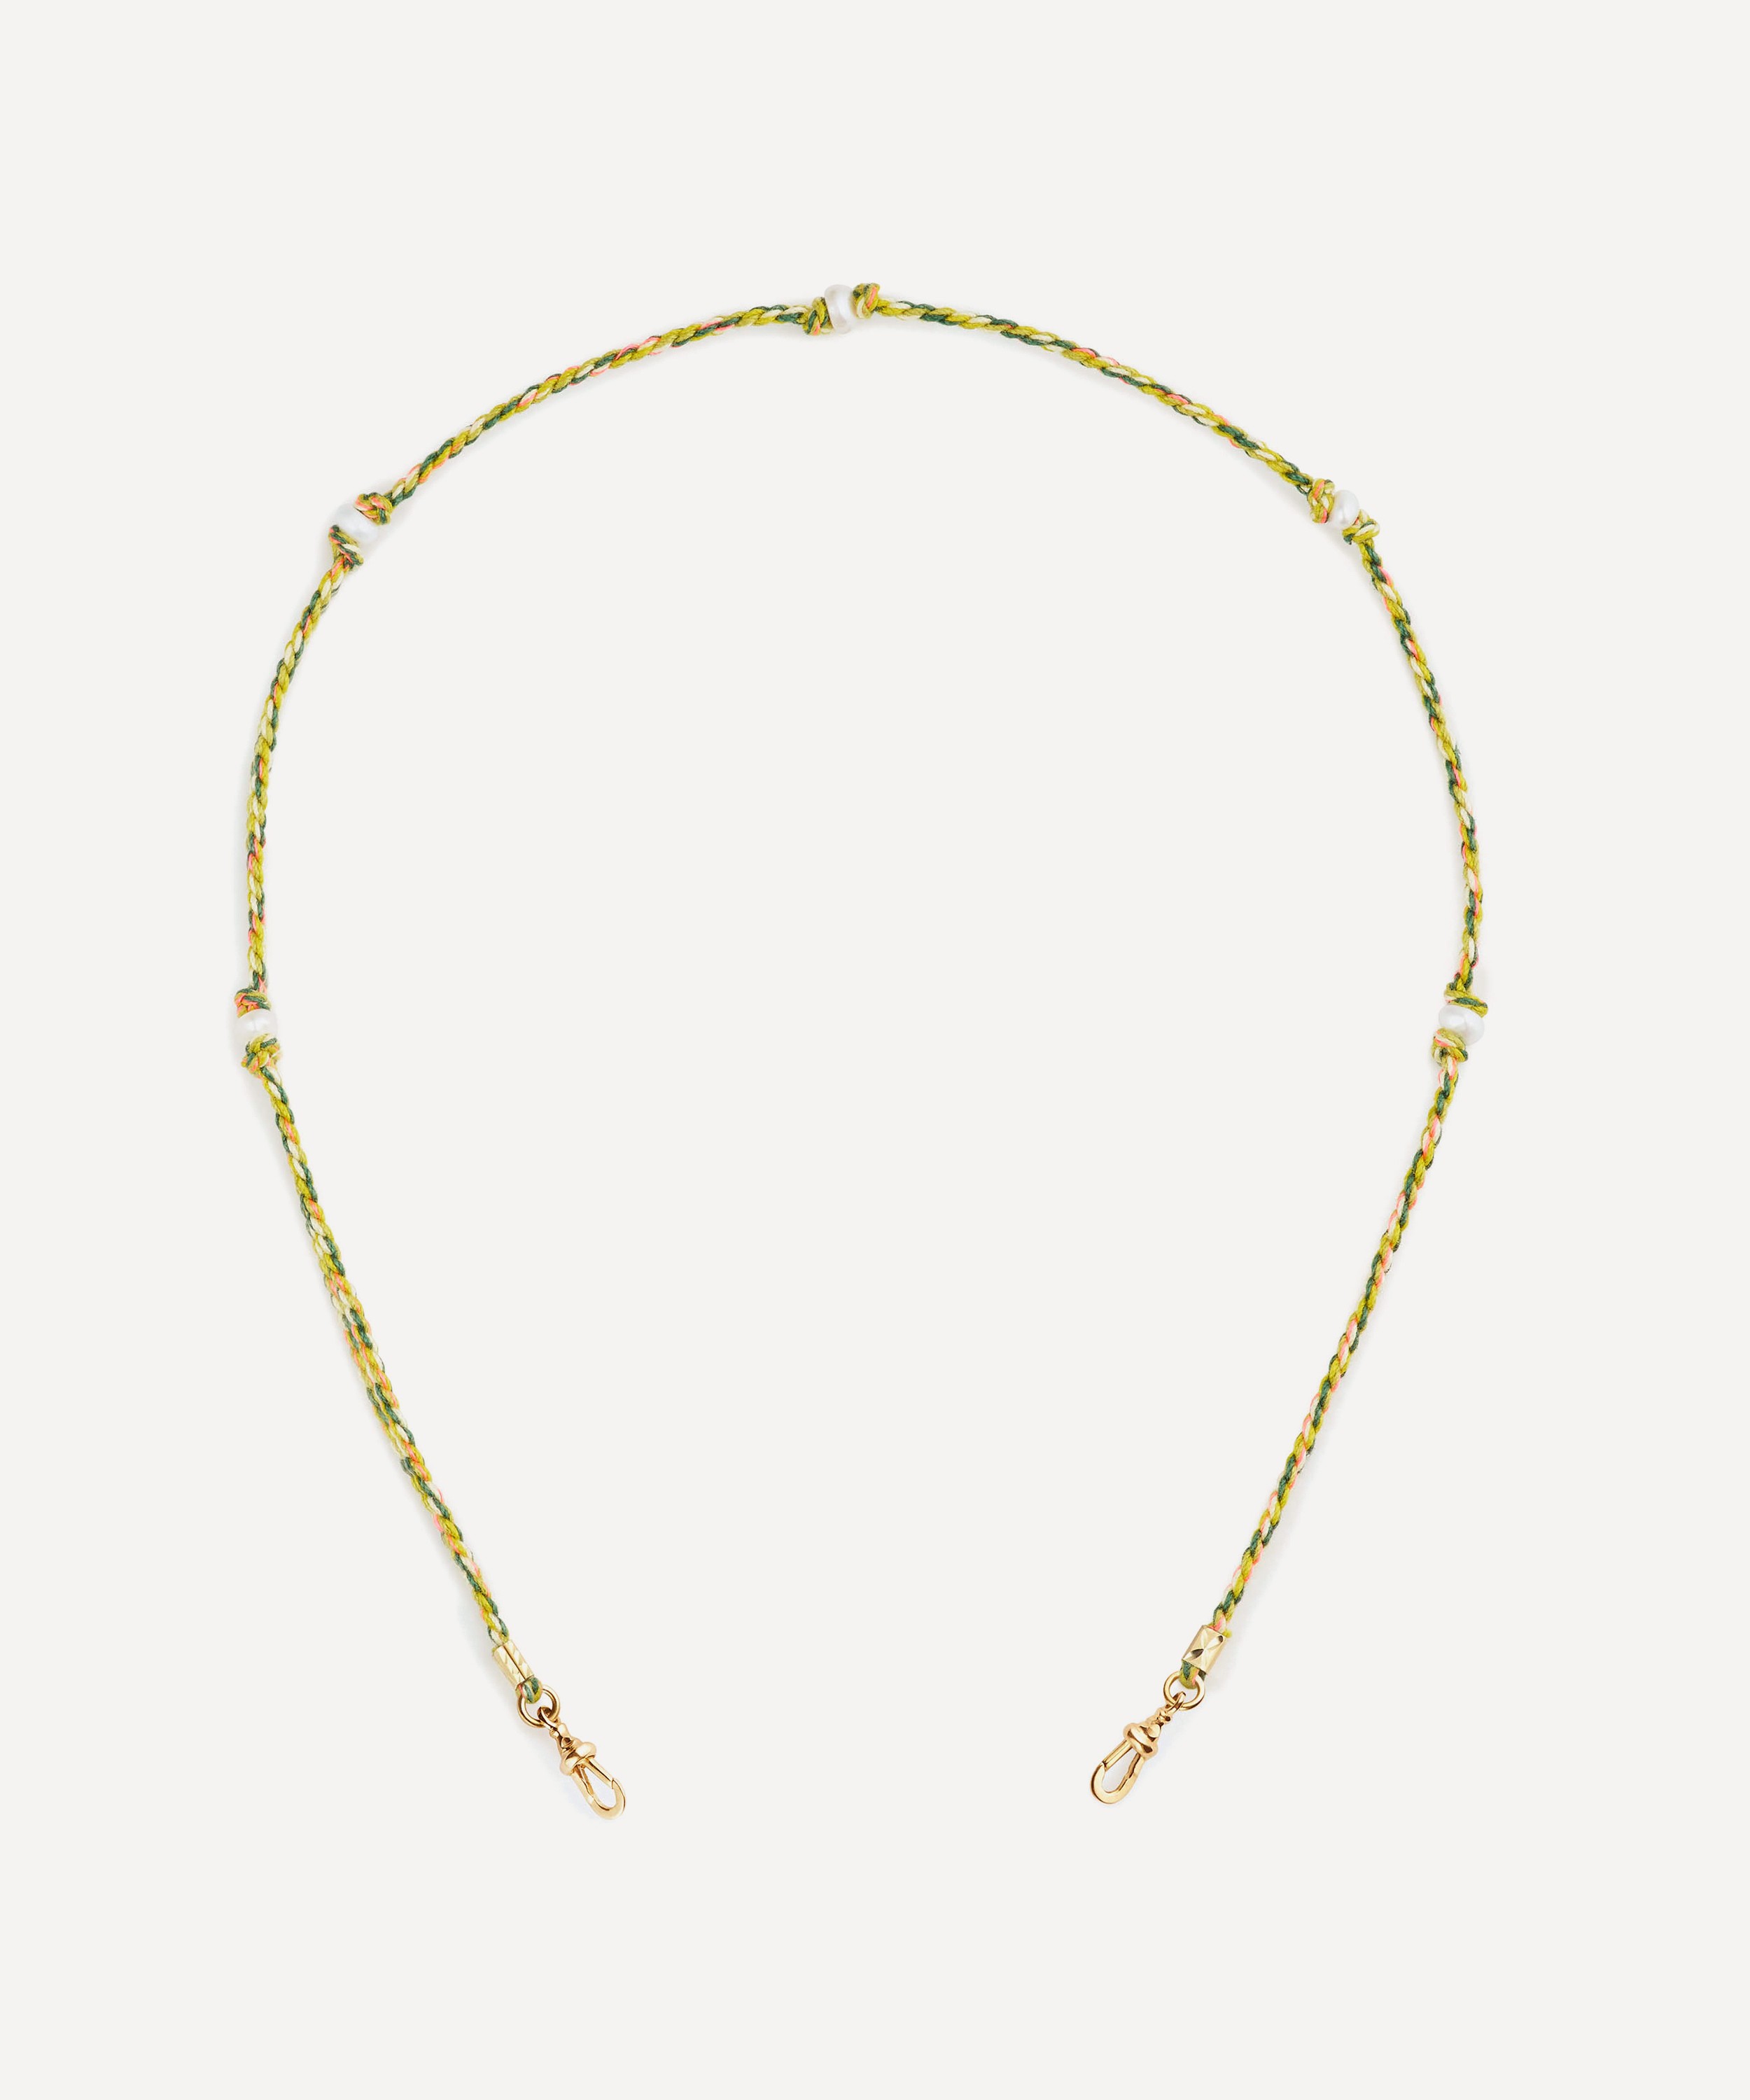 Marie Lichtenberg - 9ct Gold Mauli Green And Pink Pearl Necklace